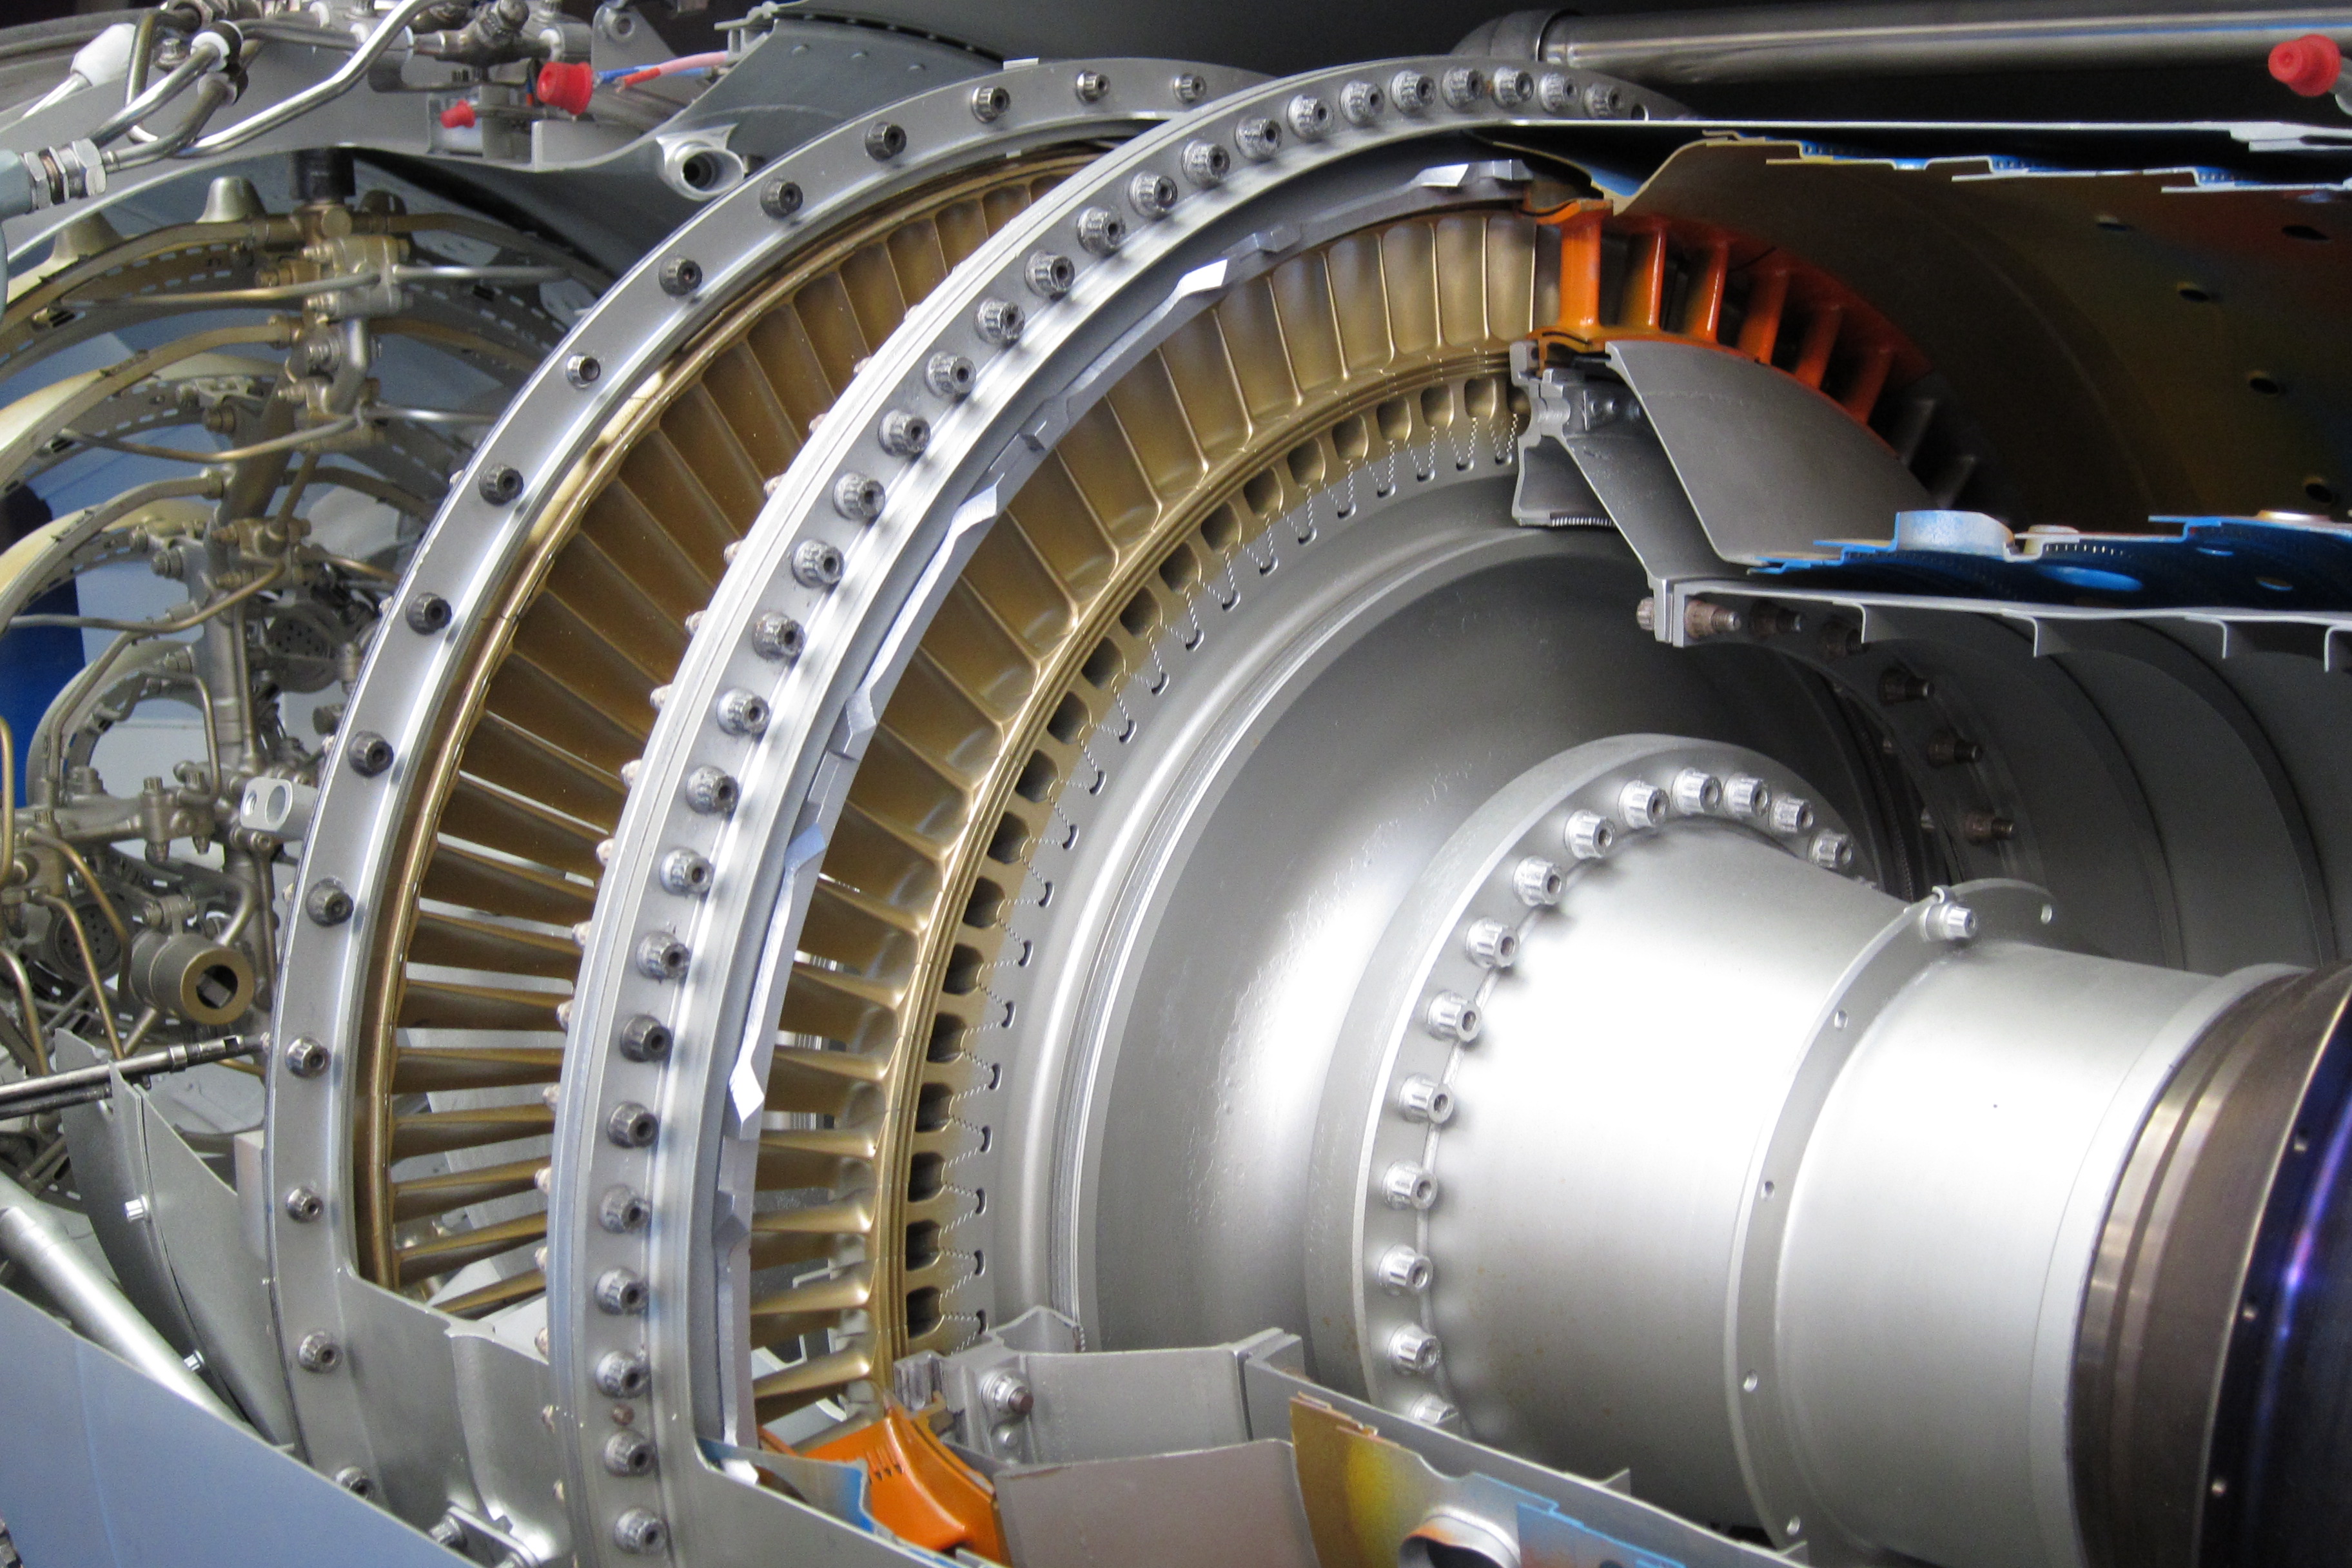 File:Turbine of a sectioned Rolls-Royce Turboméca Adour turbofan